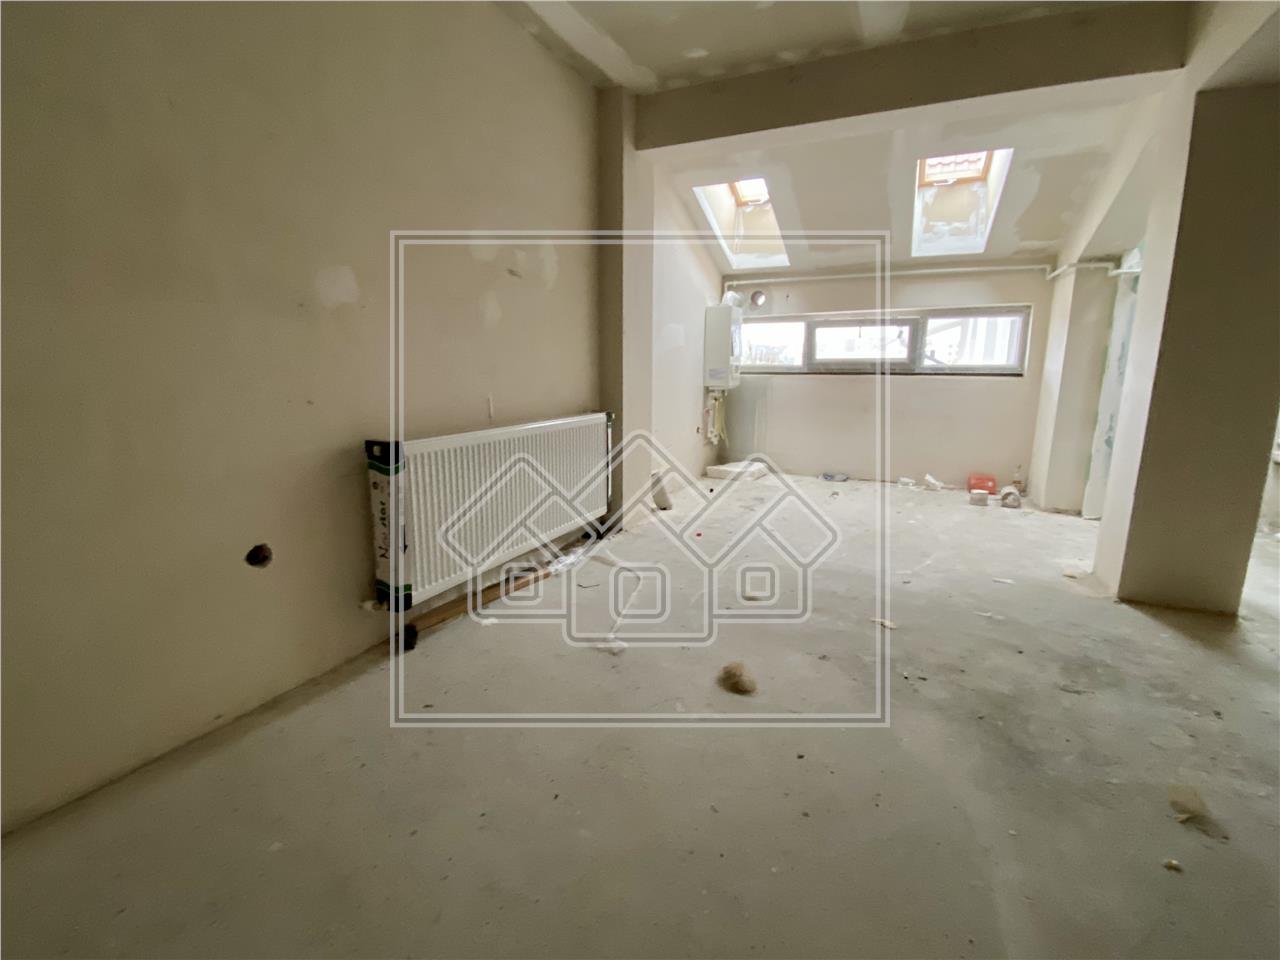 2 room apartment for sale in Sibiu - new and listed building